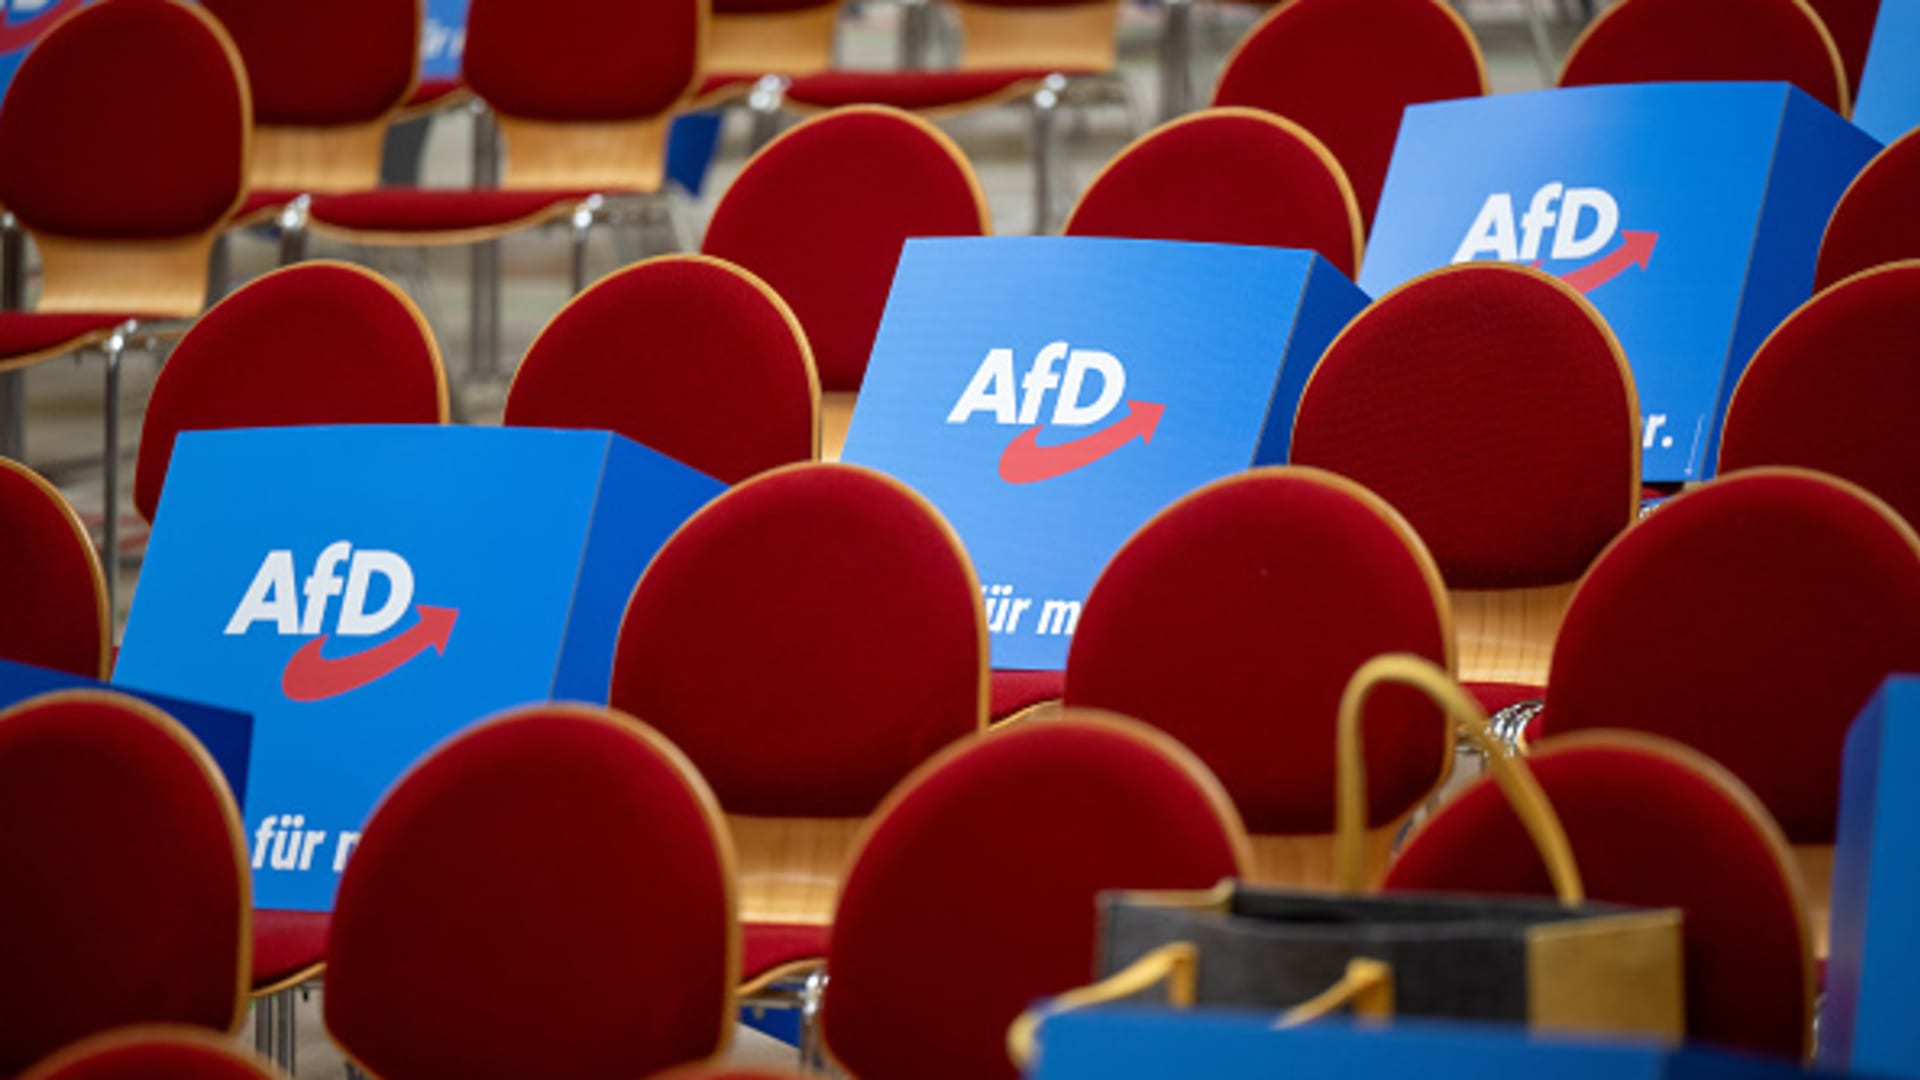 Germany's AfD is finding success on TikTok as its youth vote grows